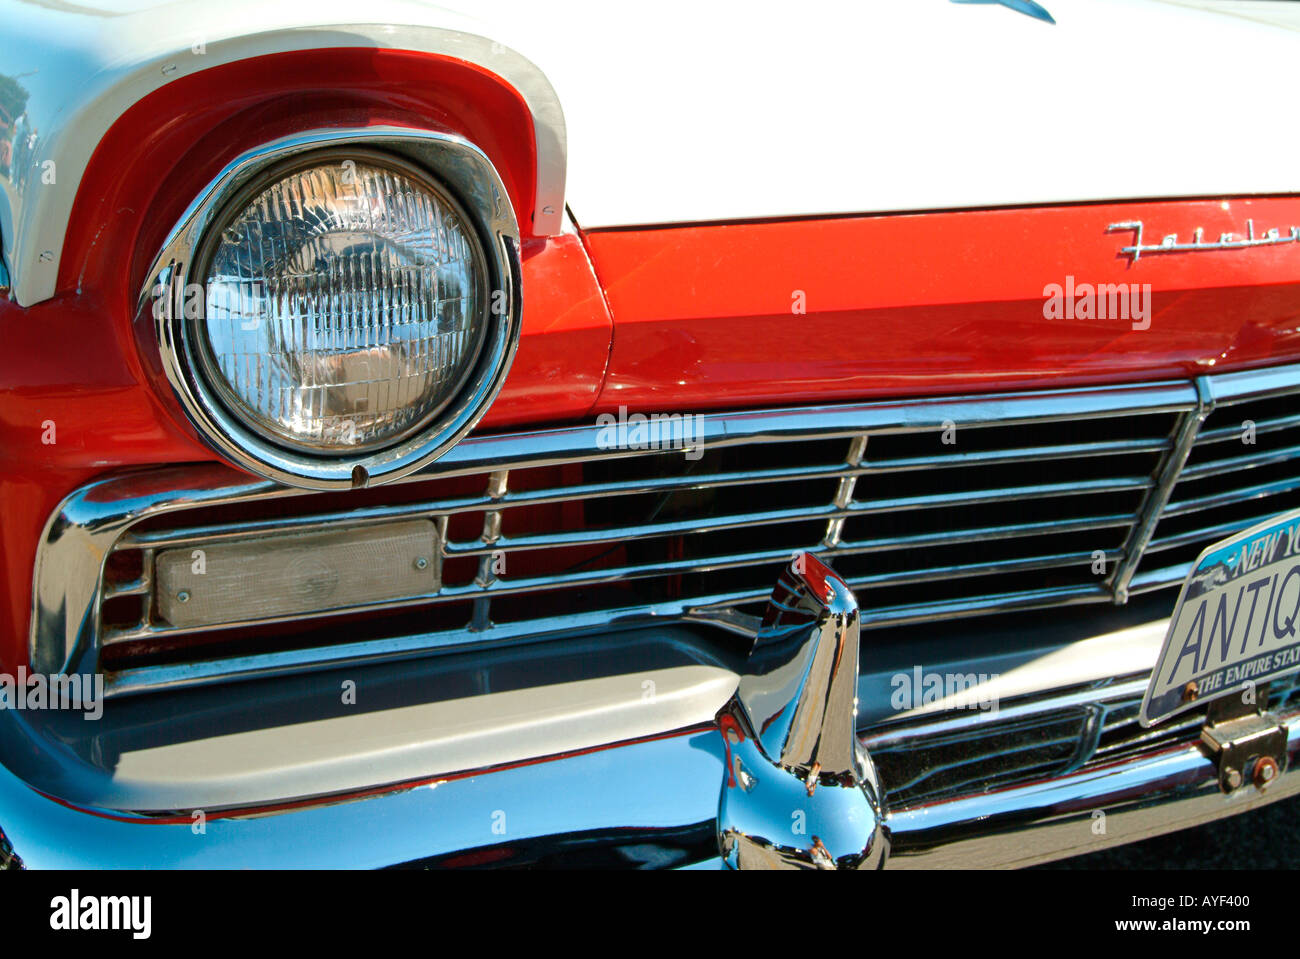 A red and white 57 Ford Fairlane Original license plate number changed to ANTIQUE by the photographer Stock Photo